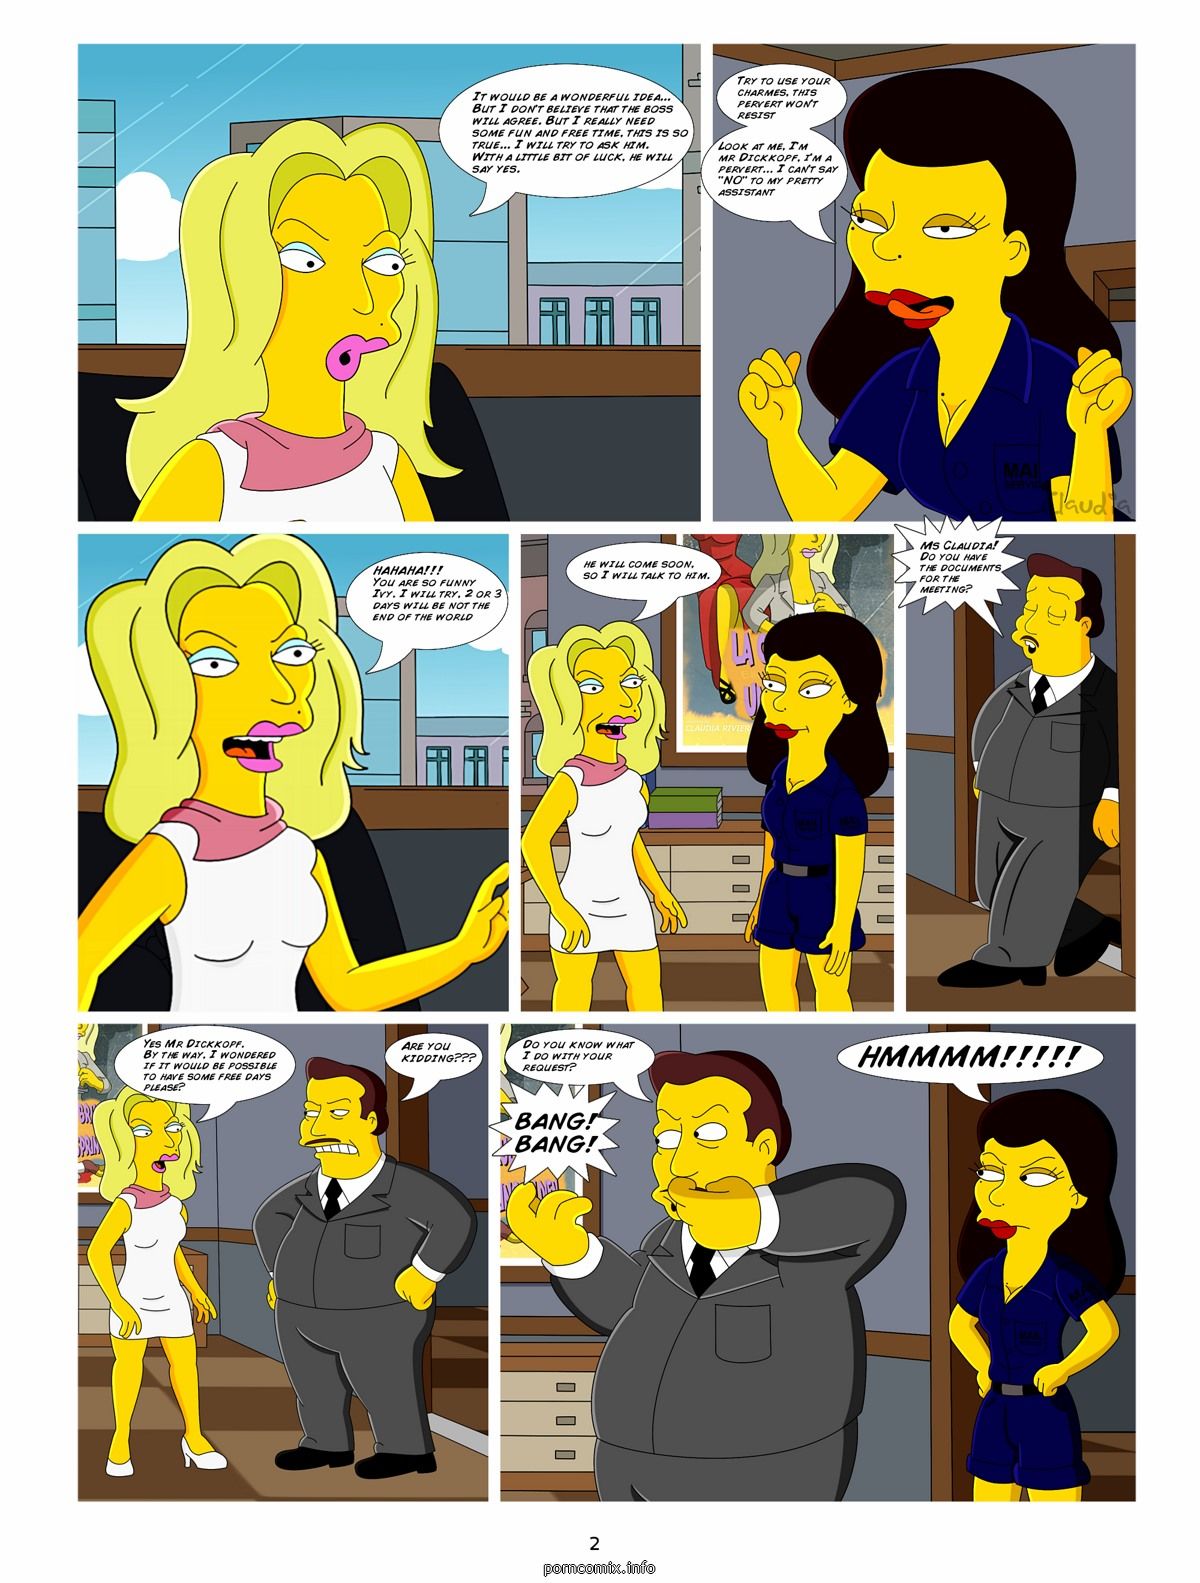 [Claudia] The Simpsons - Road To Springfield page 3